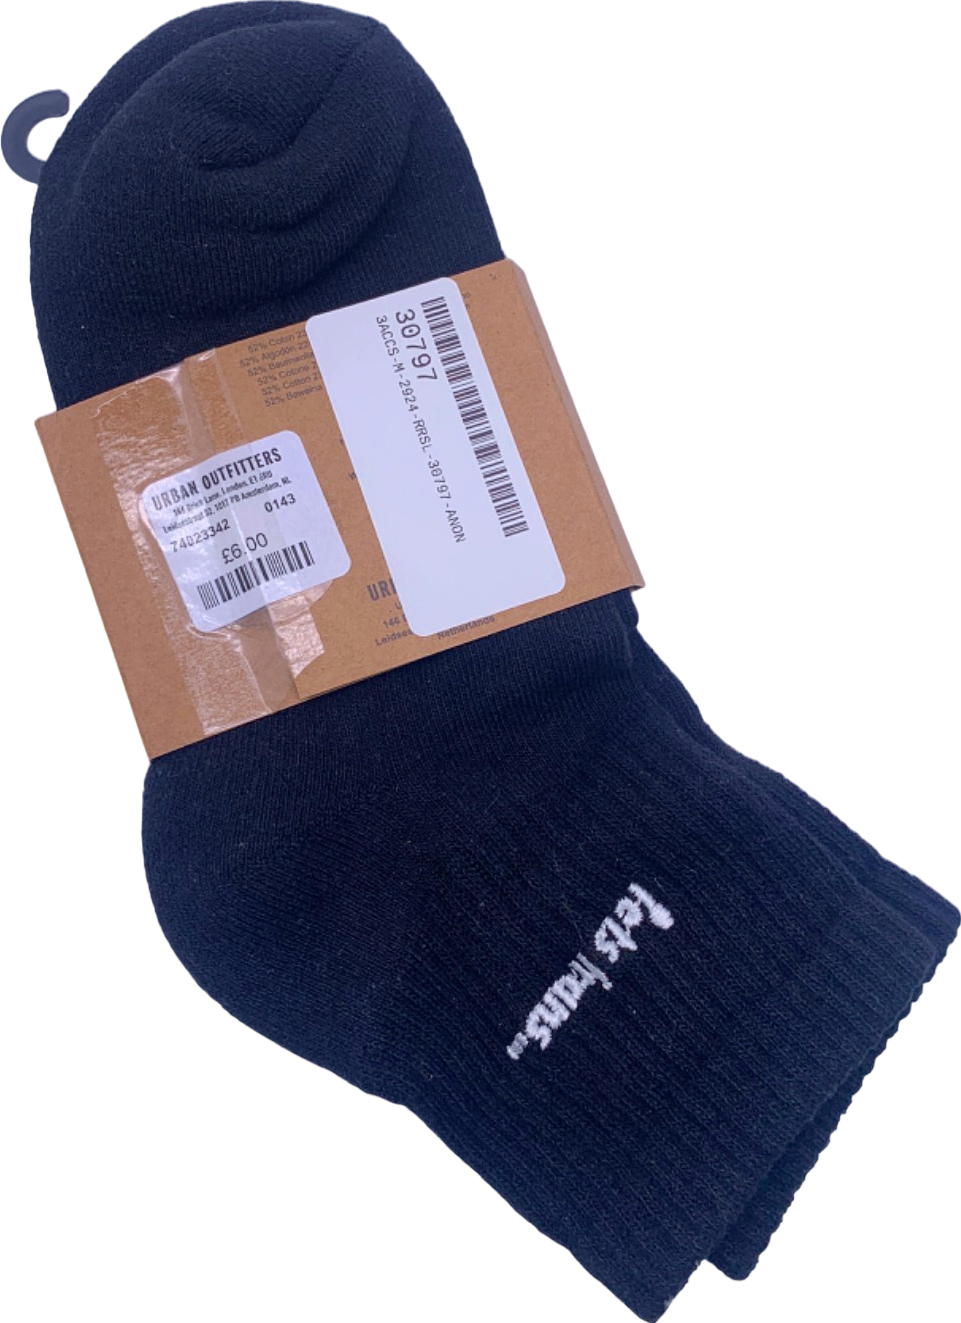 iets frans Black Ribbed Crew Socks One Size